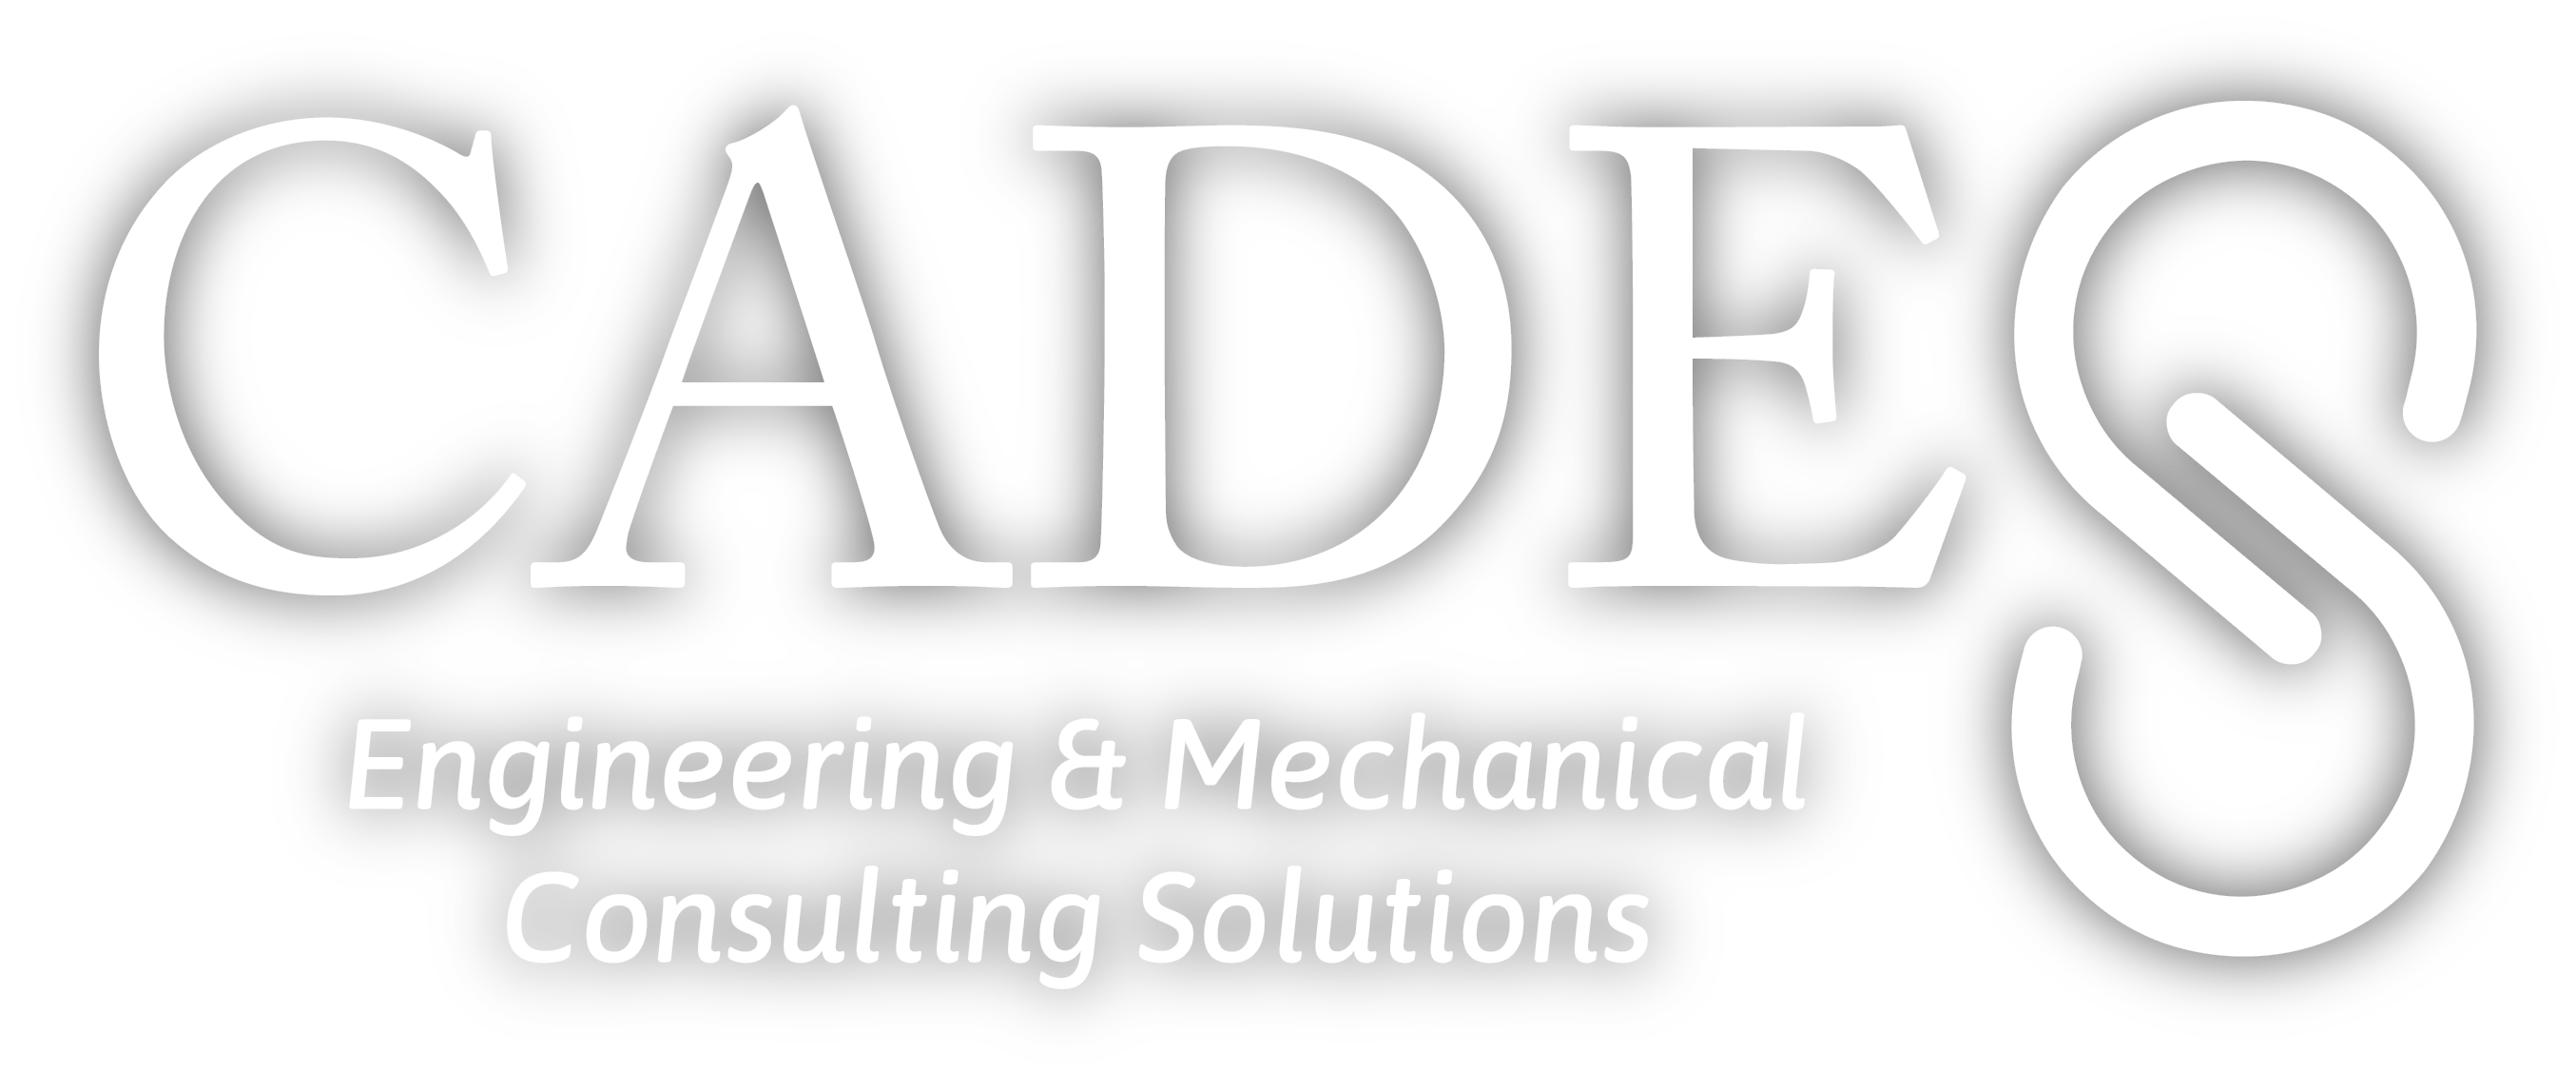 Cades Engineering & Mechanical Consulting Solutions